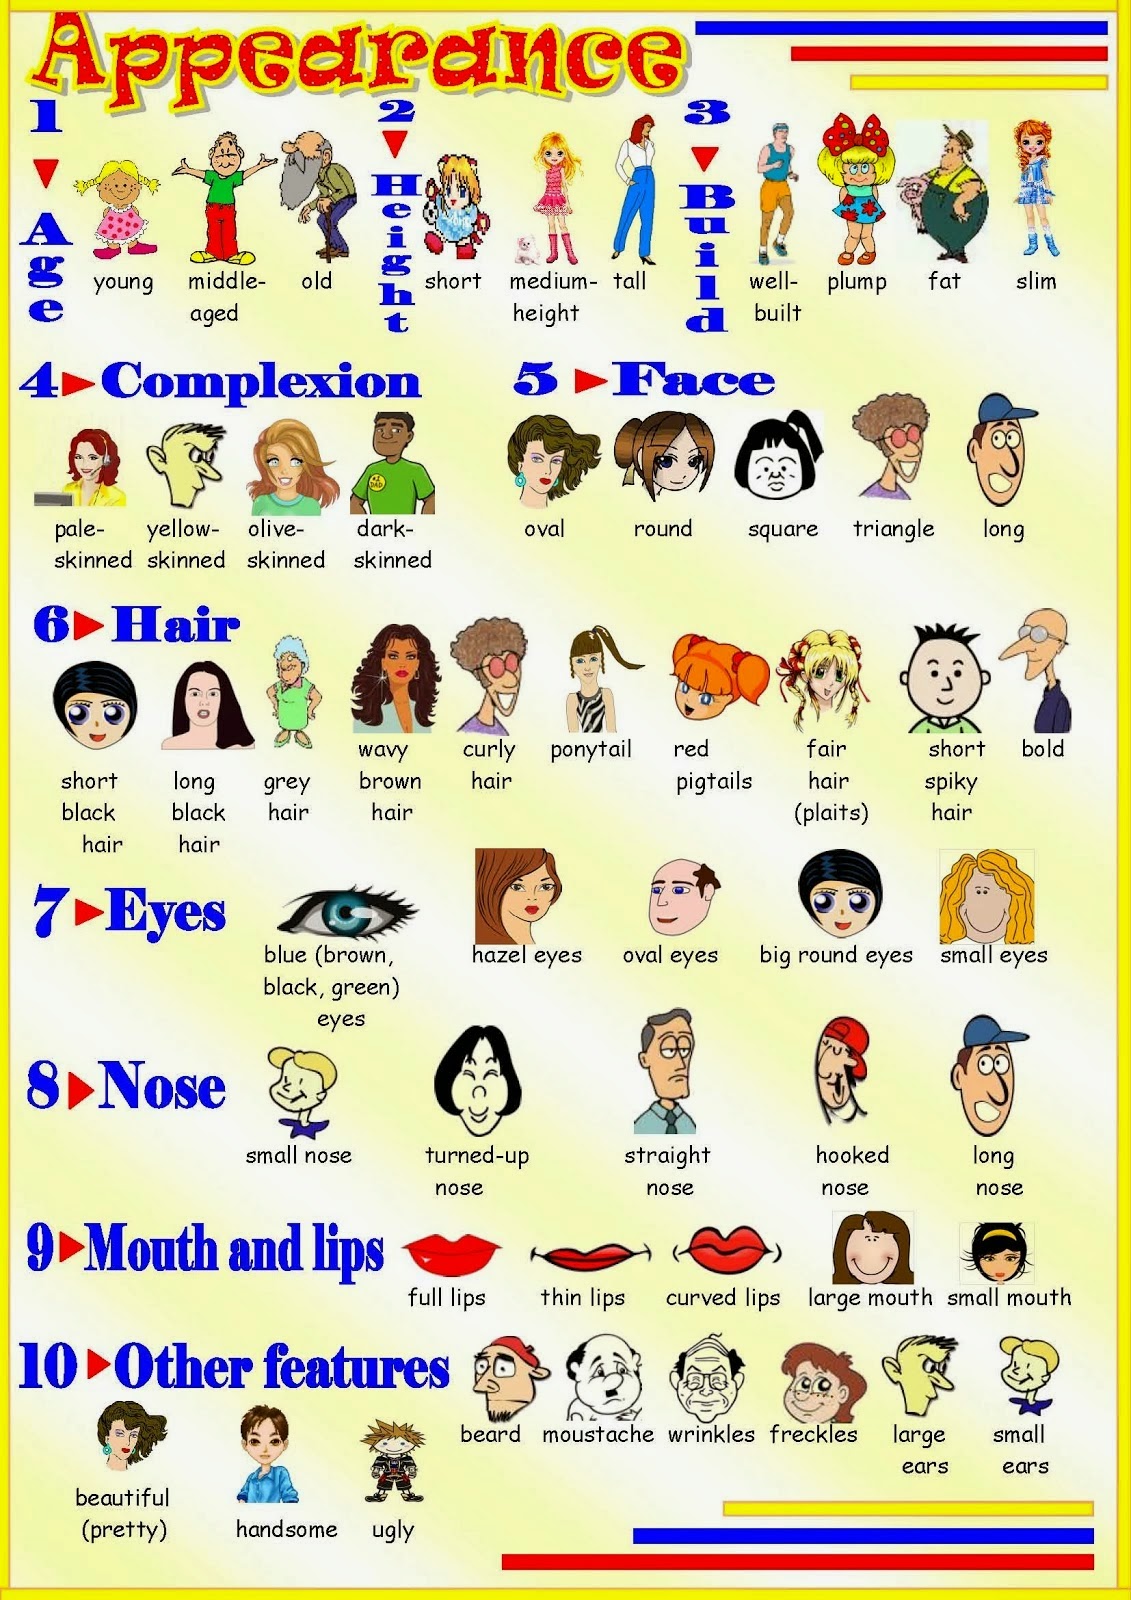 describing-people-physical-appearance-adjectives-list-learn-english